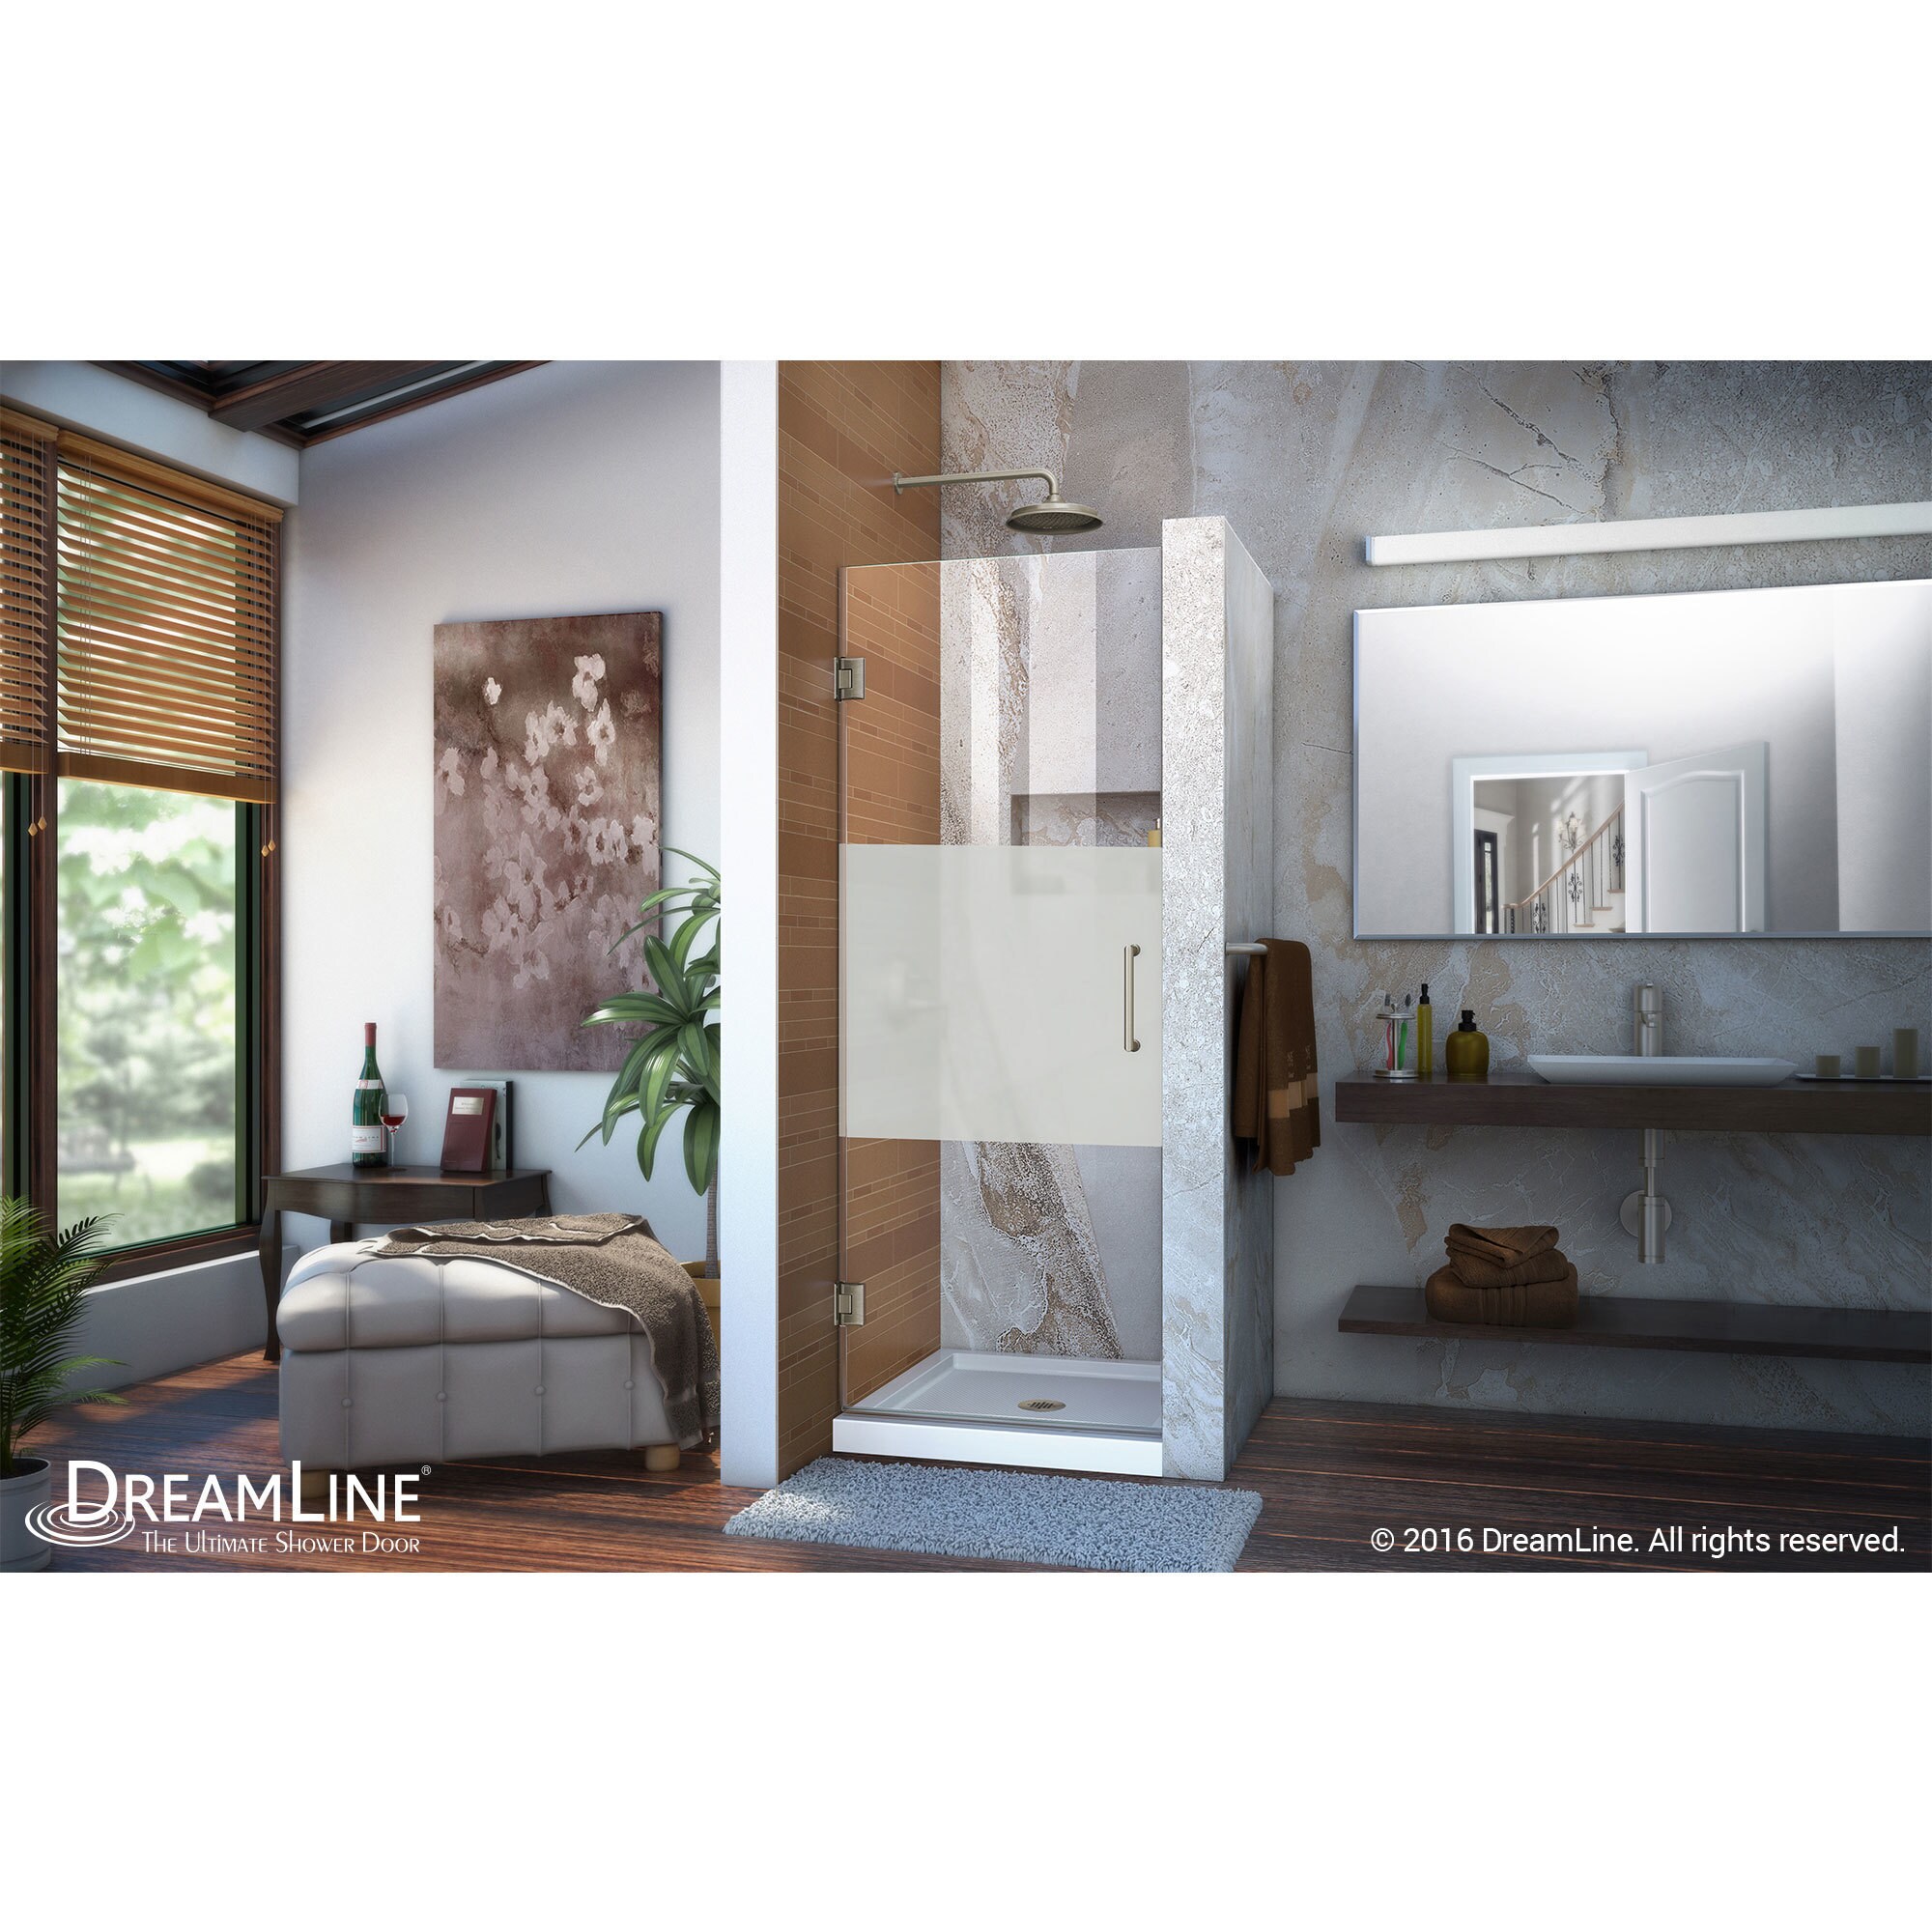 https://ak1.ostkcdn.com/images/products/9199026/DreamLine-Unidoor-28-in.-W-x-72-in.-H-Frameless-Hinged-Shower-Door-Frosted-Band-Glass-90a2d002-010a-456e-bfa0-725633ee8c6f.jpg